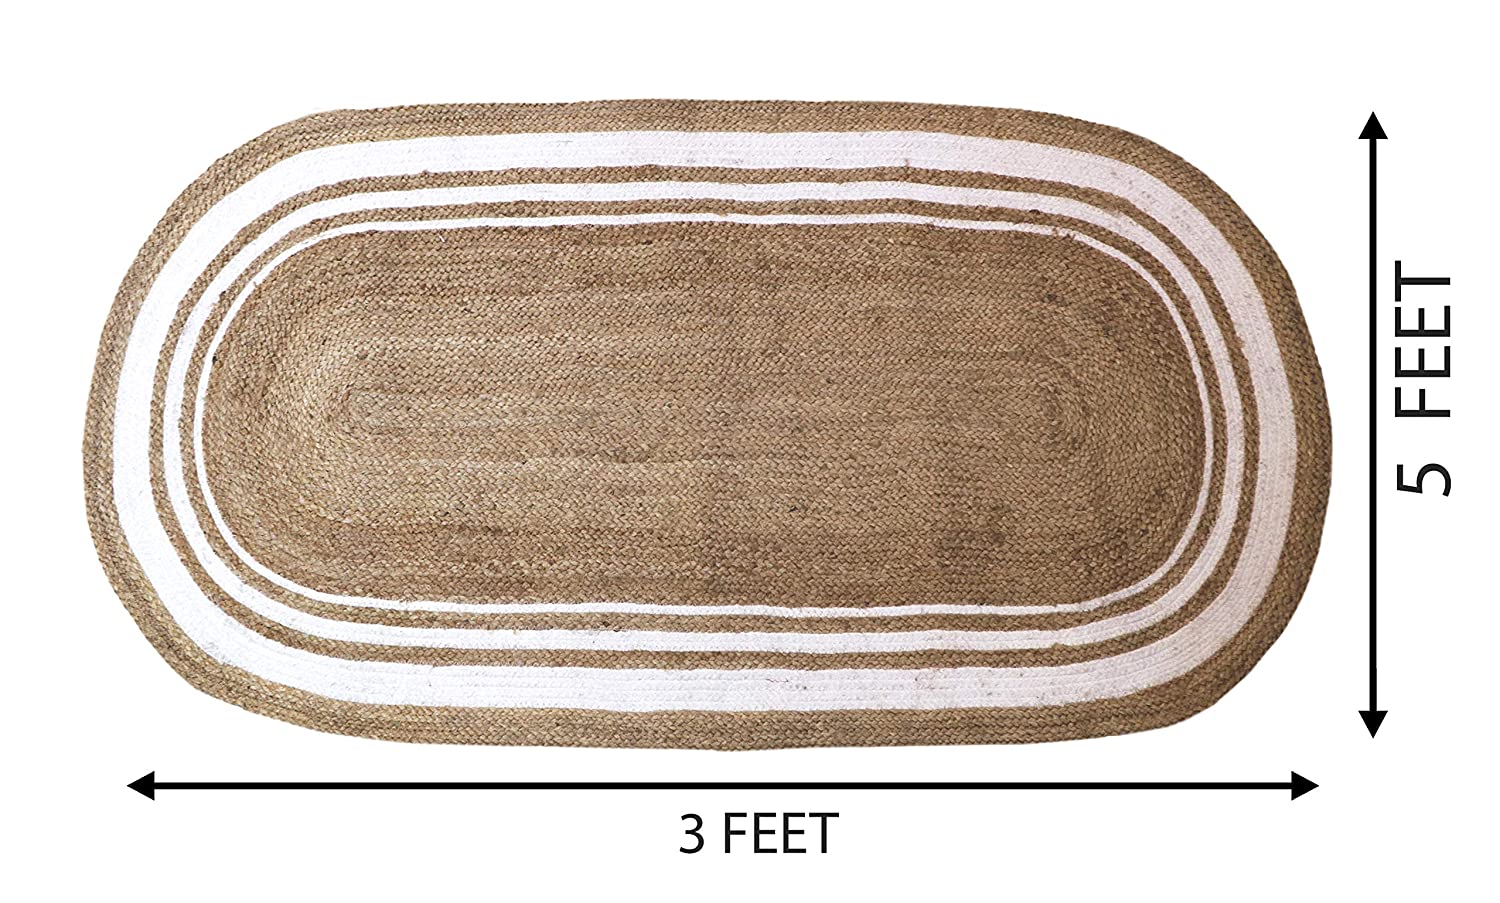 Cotton and Jute Floor Rug - White and Beige Color 